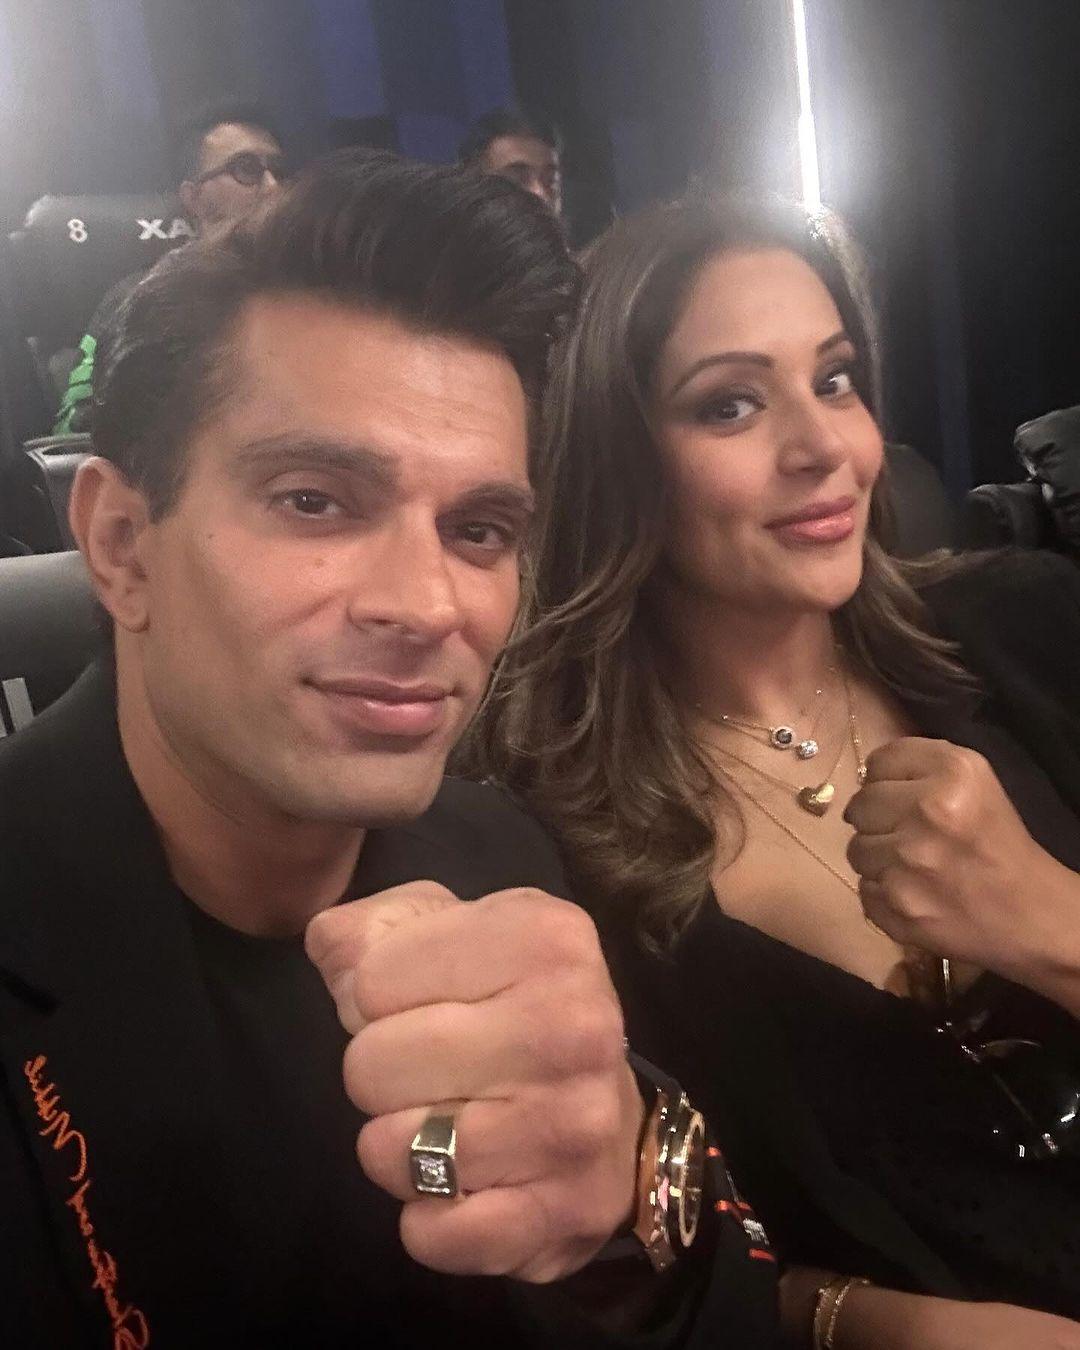 Bipasha also attended the screening of Fighter with Karan and he posted this selfie from the movie hall